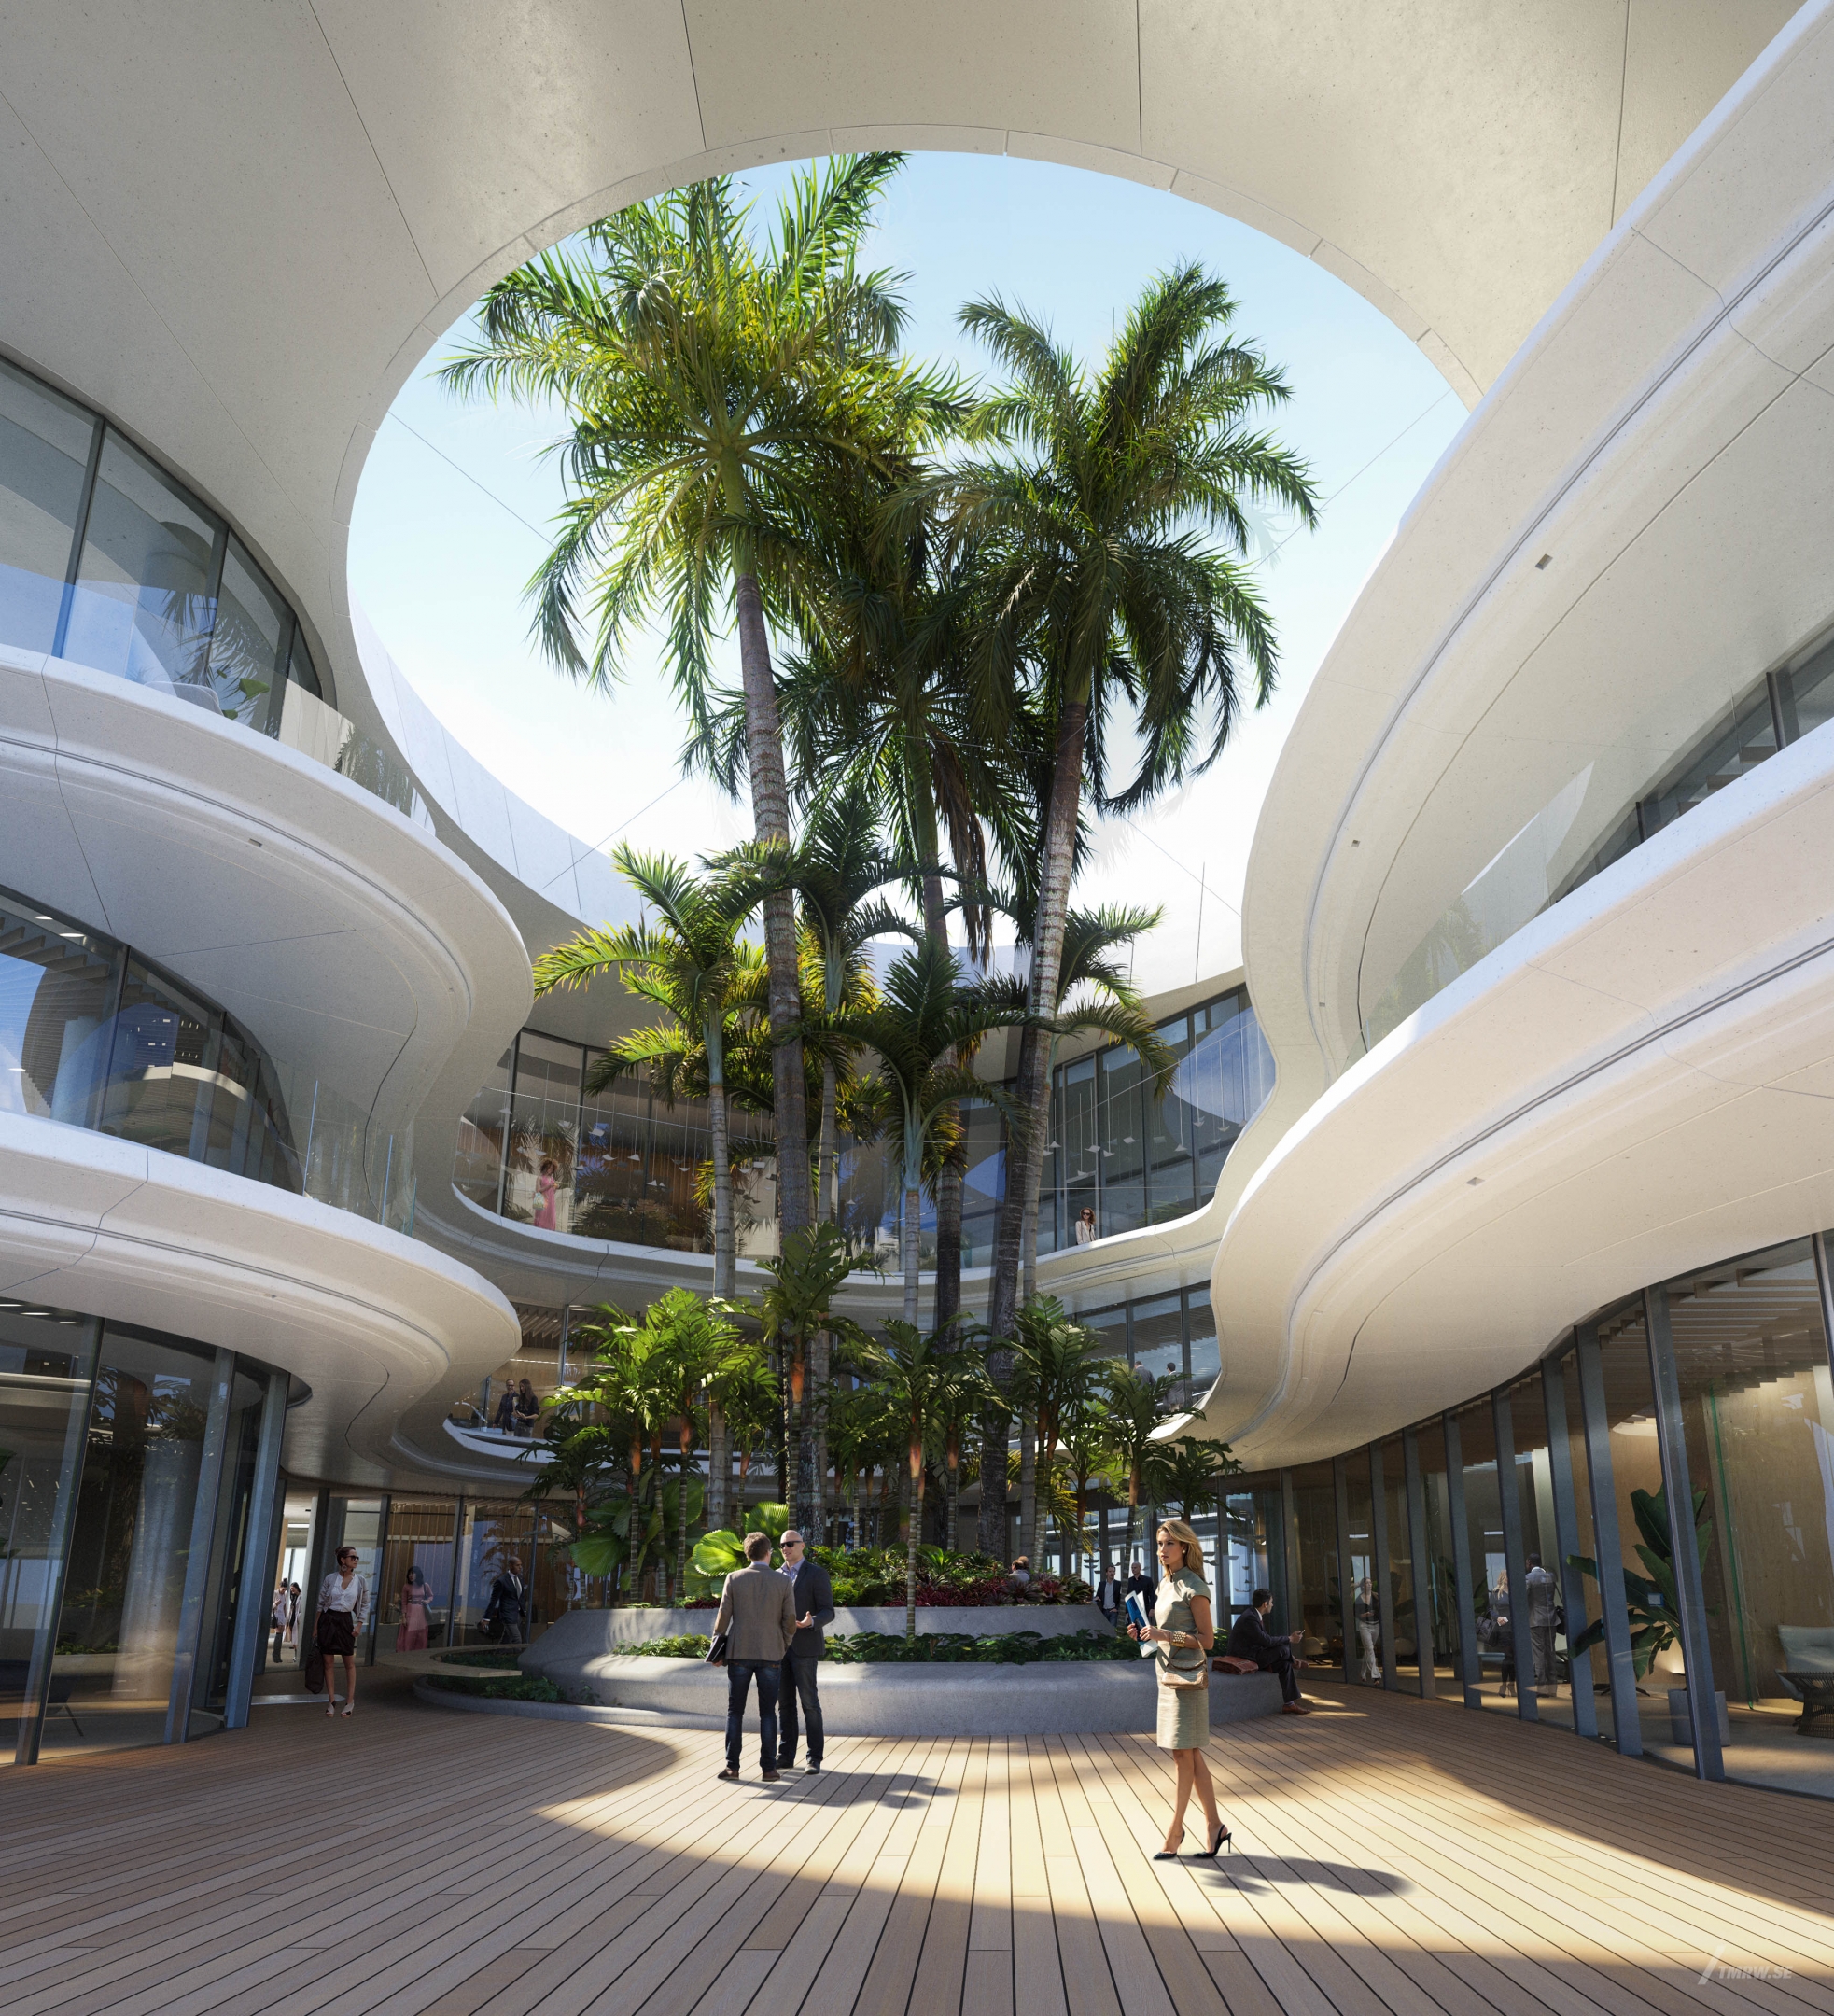 Architectural visualization of Royal Caribbean for HOK, an office building during day light from an interior view.